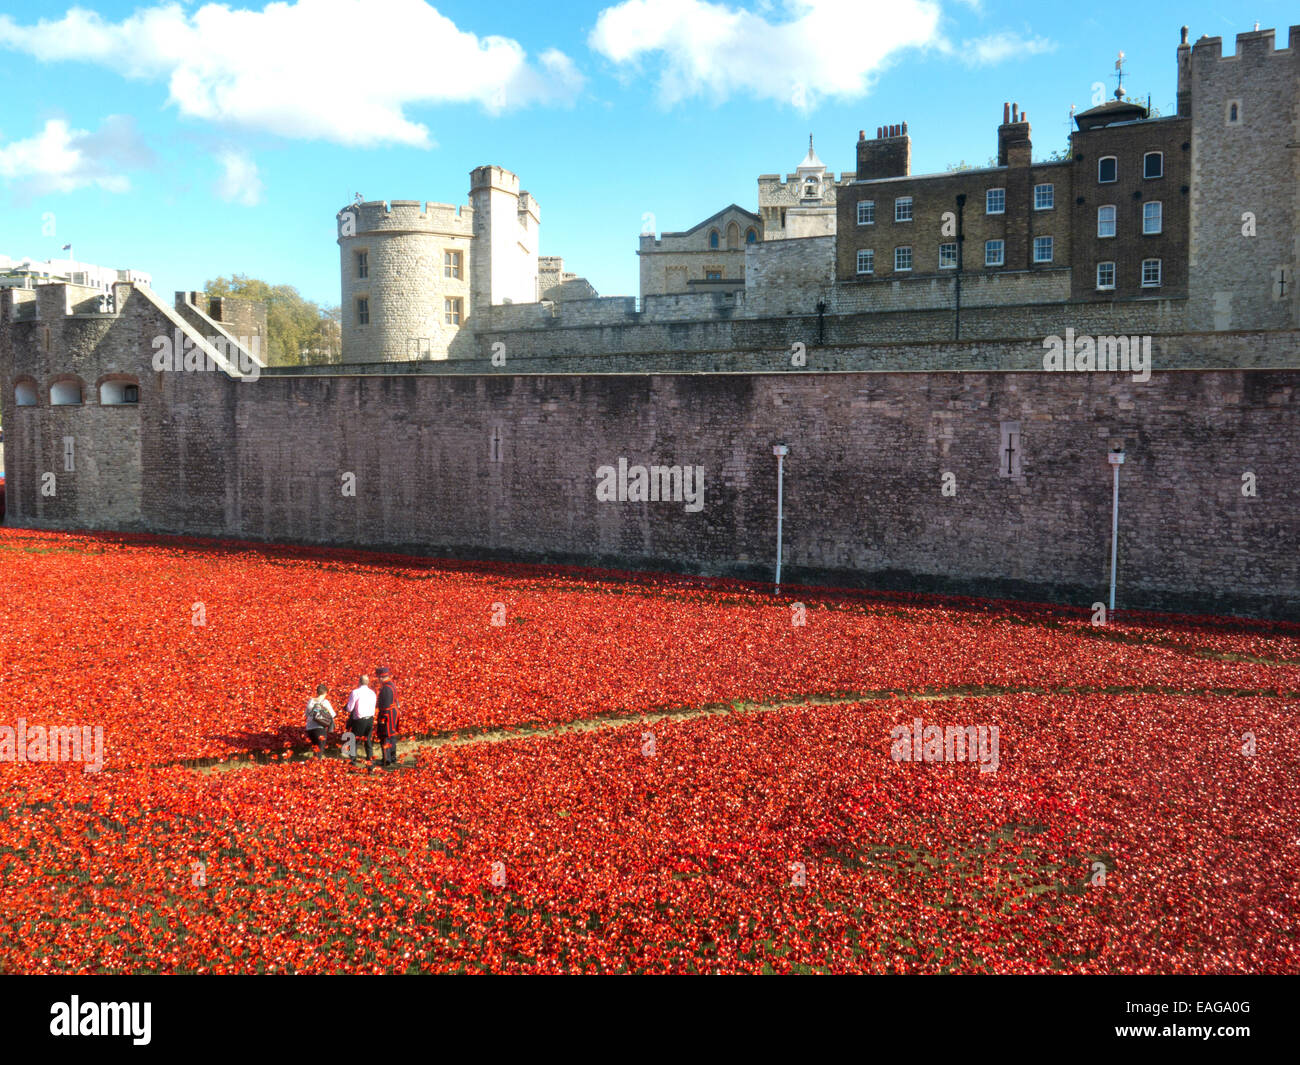 2014 Ceramic poppy display at the Tower of London symbolising the World War 1 Centenary 'Blood Swept Lands and Seas of Red’ Stock Photo